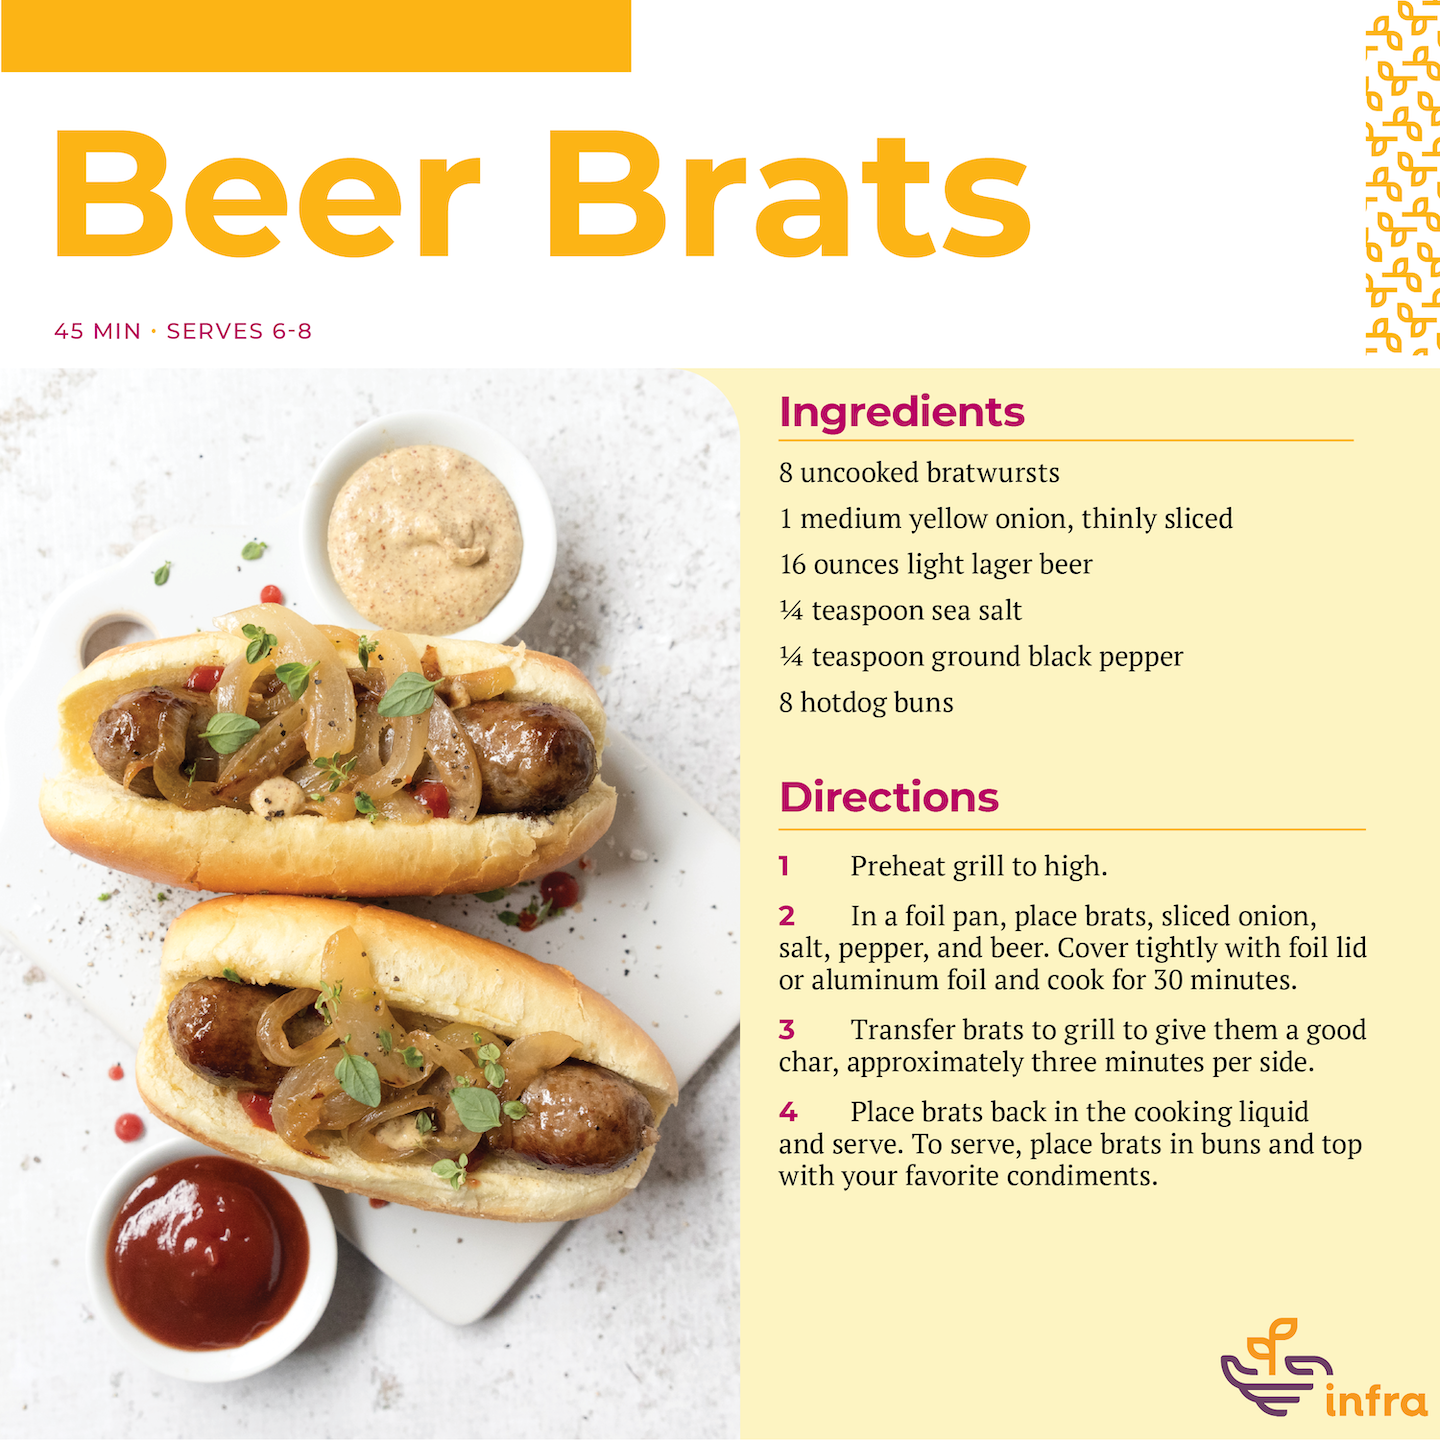 Beer Brats Recipe and Image